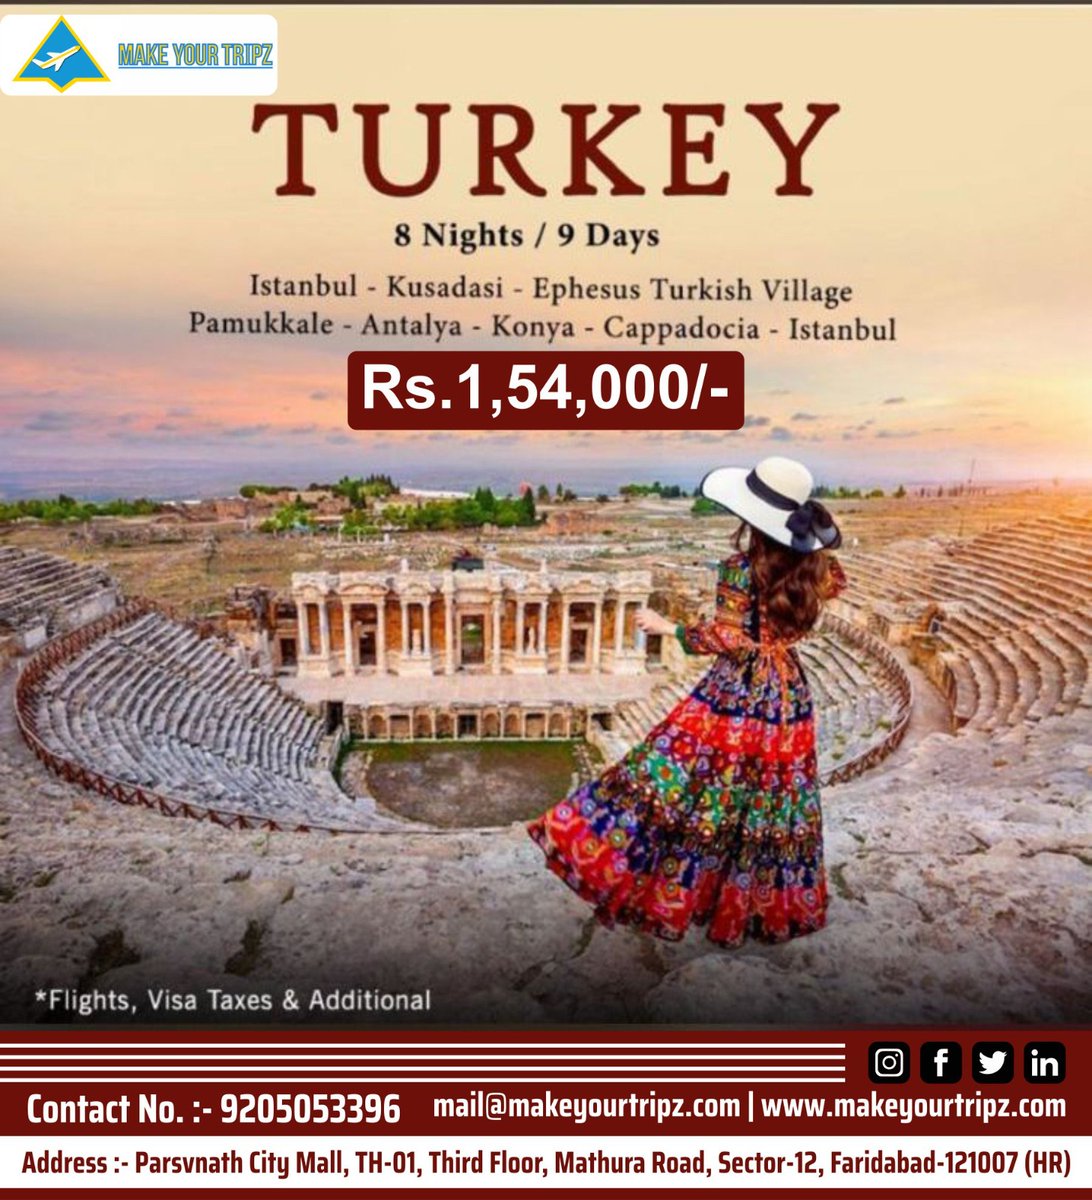 Enjoy your memorable journey to Turkey for 8N/9D with Make Your Tripz!! Call us for booking..
#makeyourtripz #makeurtripz #travels #travel #traveling #flights #traveler #traveller  #honeymoon https://t.co/LOfJzVGtjB